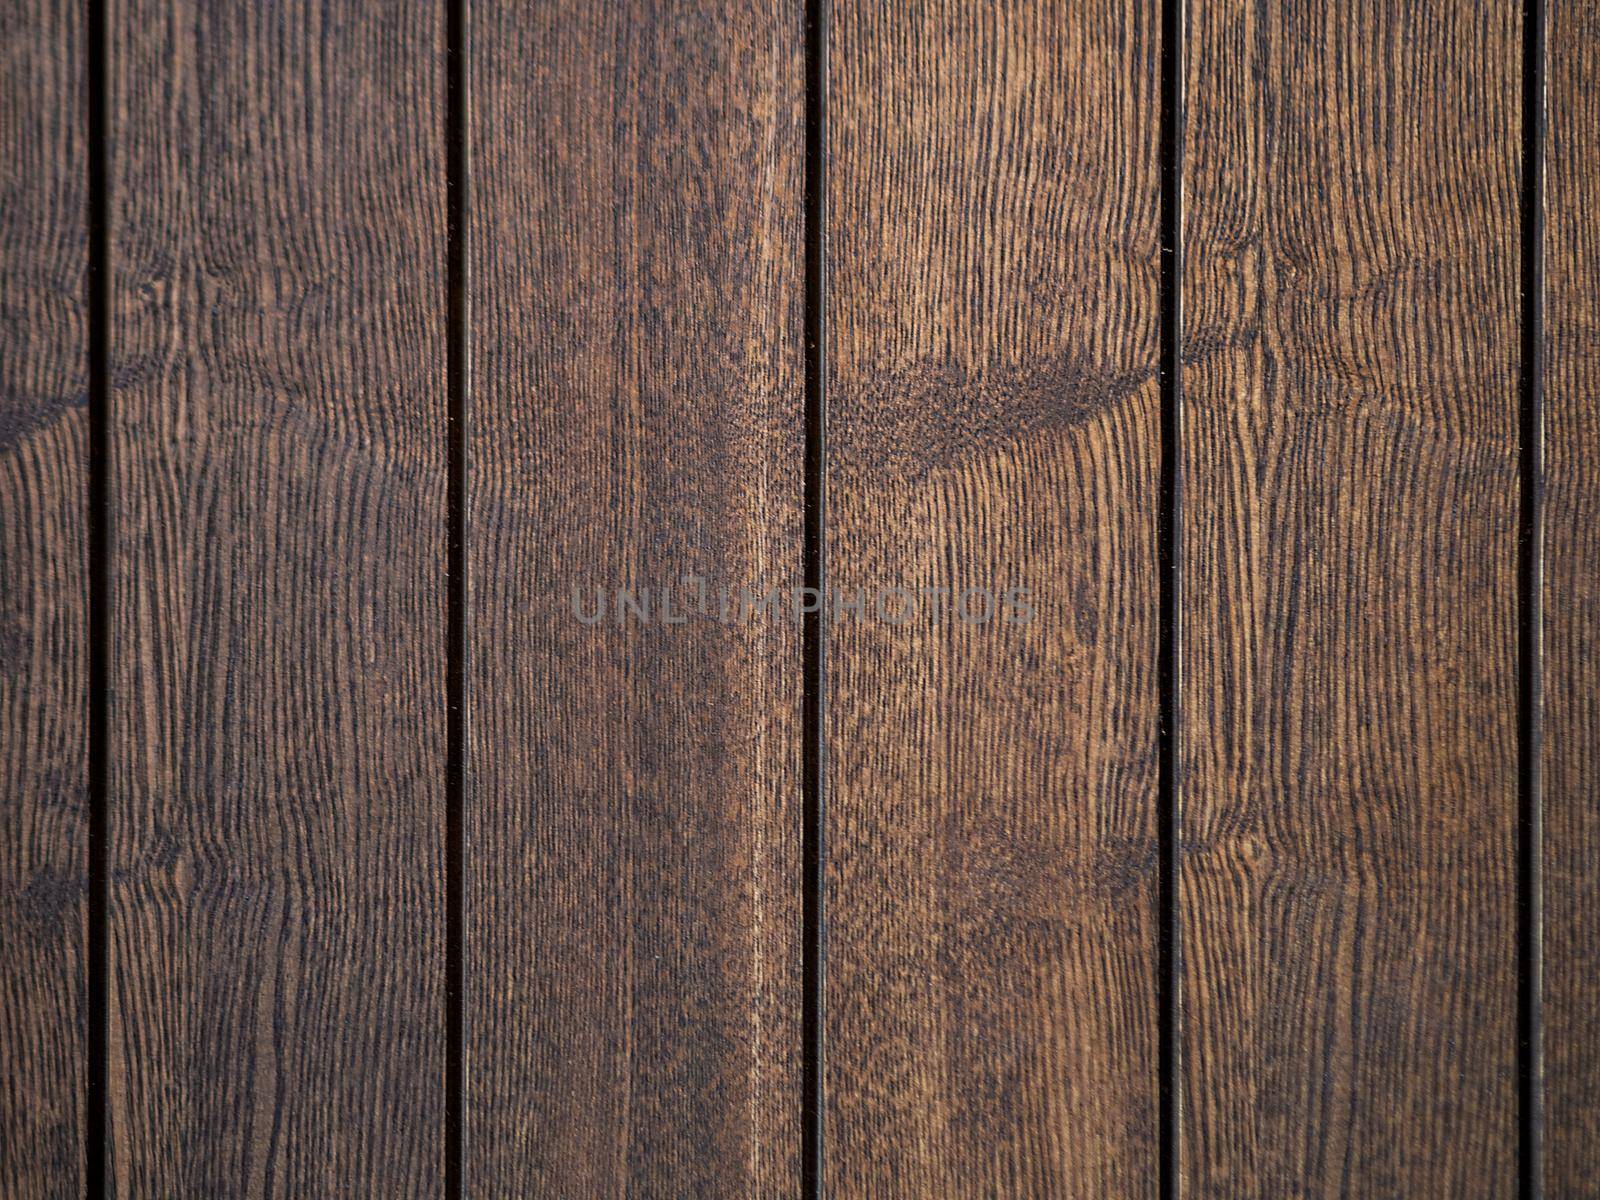 wood board texture. abstract nature background with surface wooden pattern plates. empty space and illustration for decorative website object texture or concept design